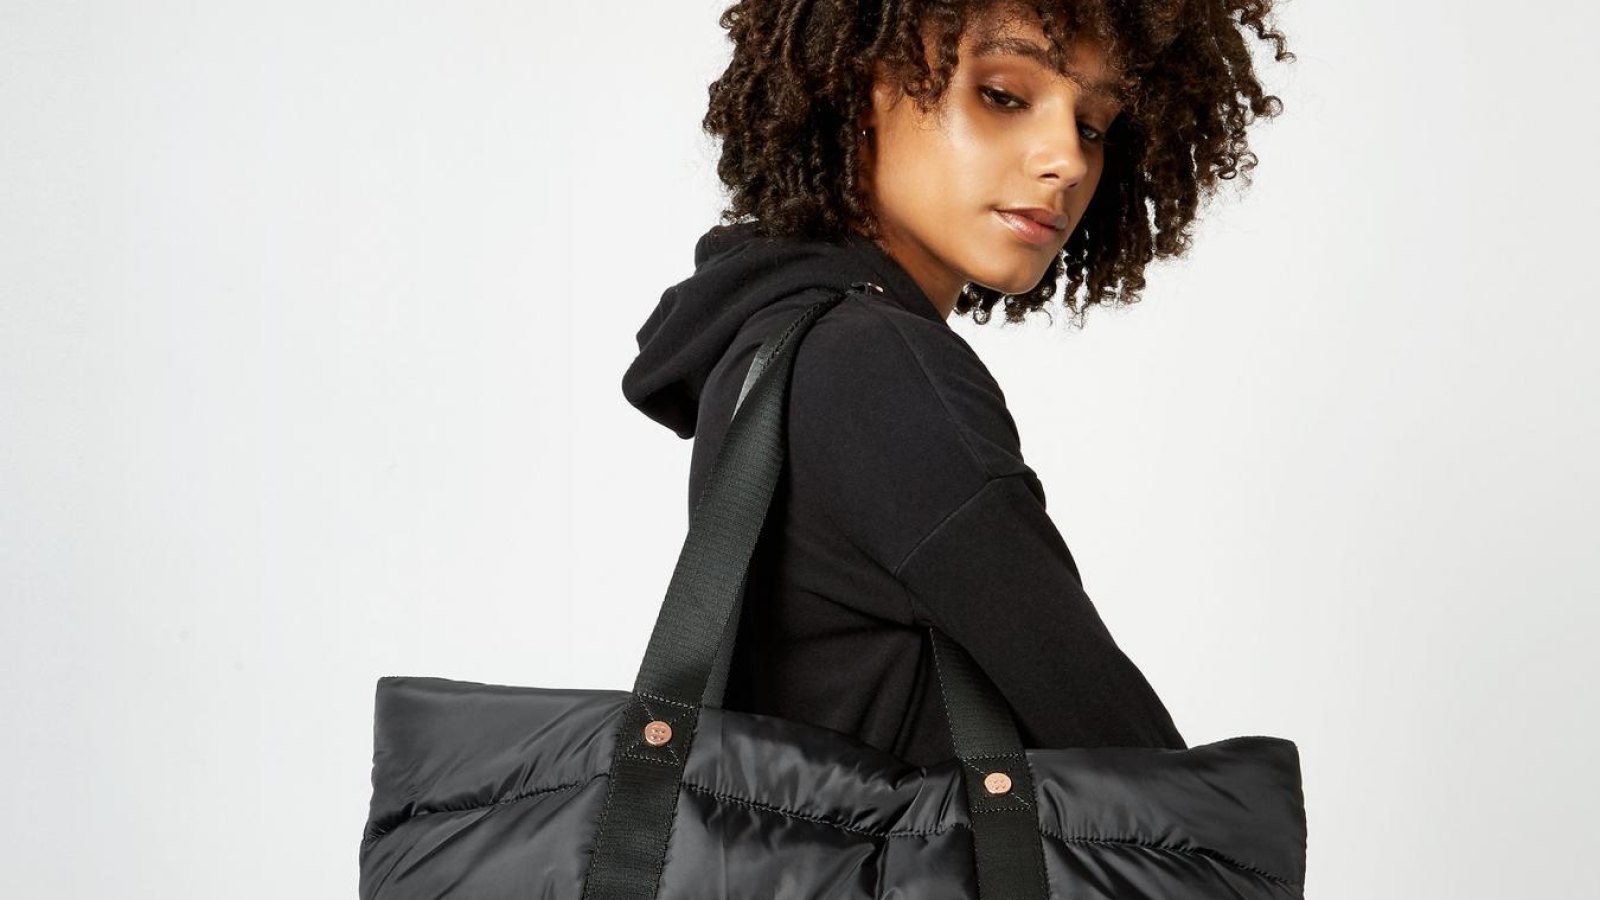 Icon Luxe Gym Bag - Sweaty Betty